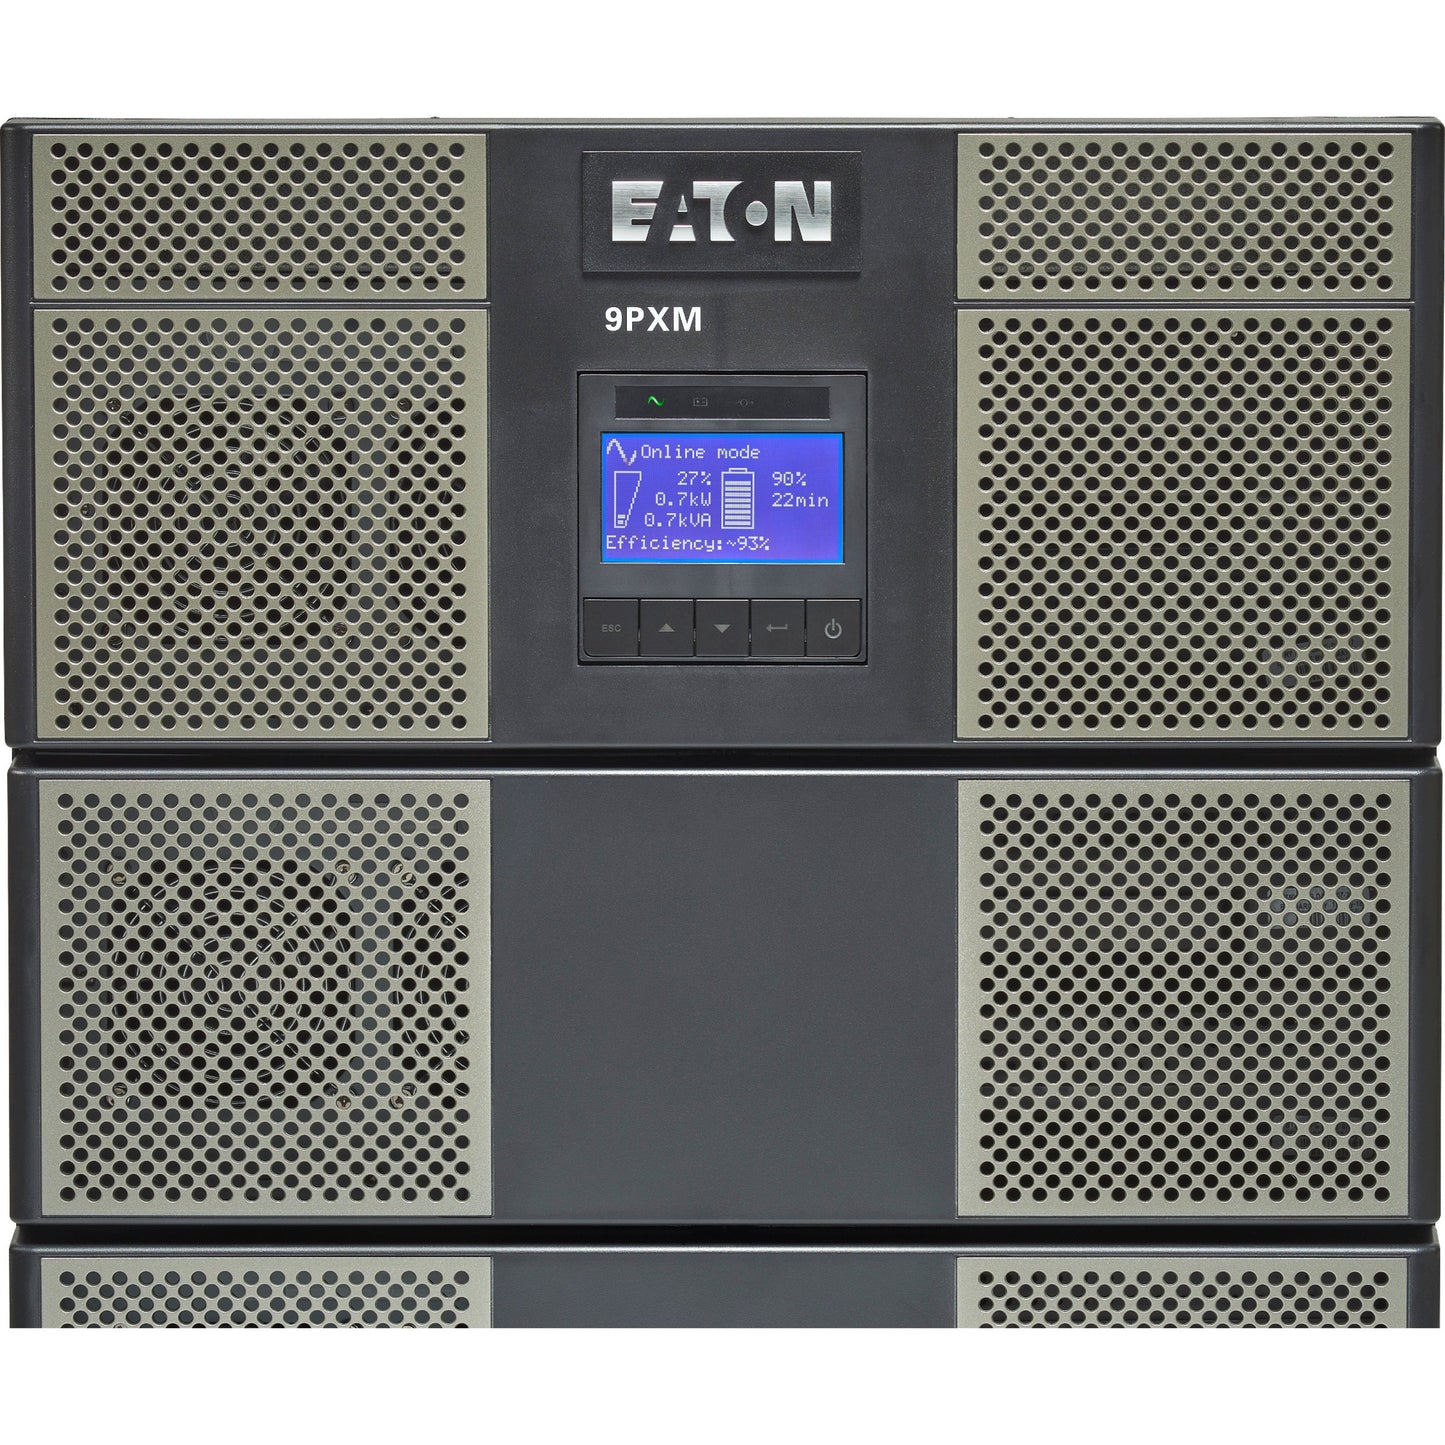 Eaton 9PXM UPS 12kVA 10.8kW 208-240V N+1 Modular Scalable Online Double-Conversion UPS Hardwired Input 4x 5-20R 2 L6-30R 2 L6-20R 2 L14-30R Outlets 21U